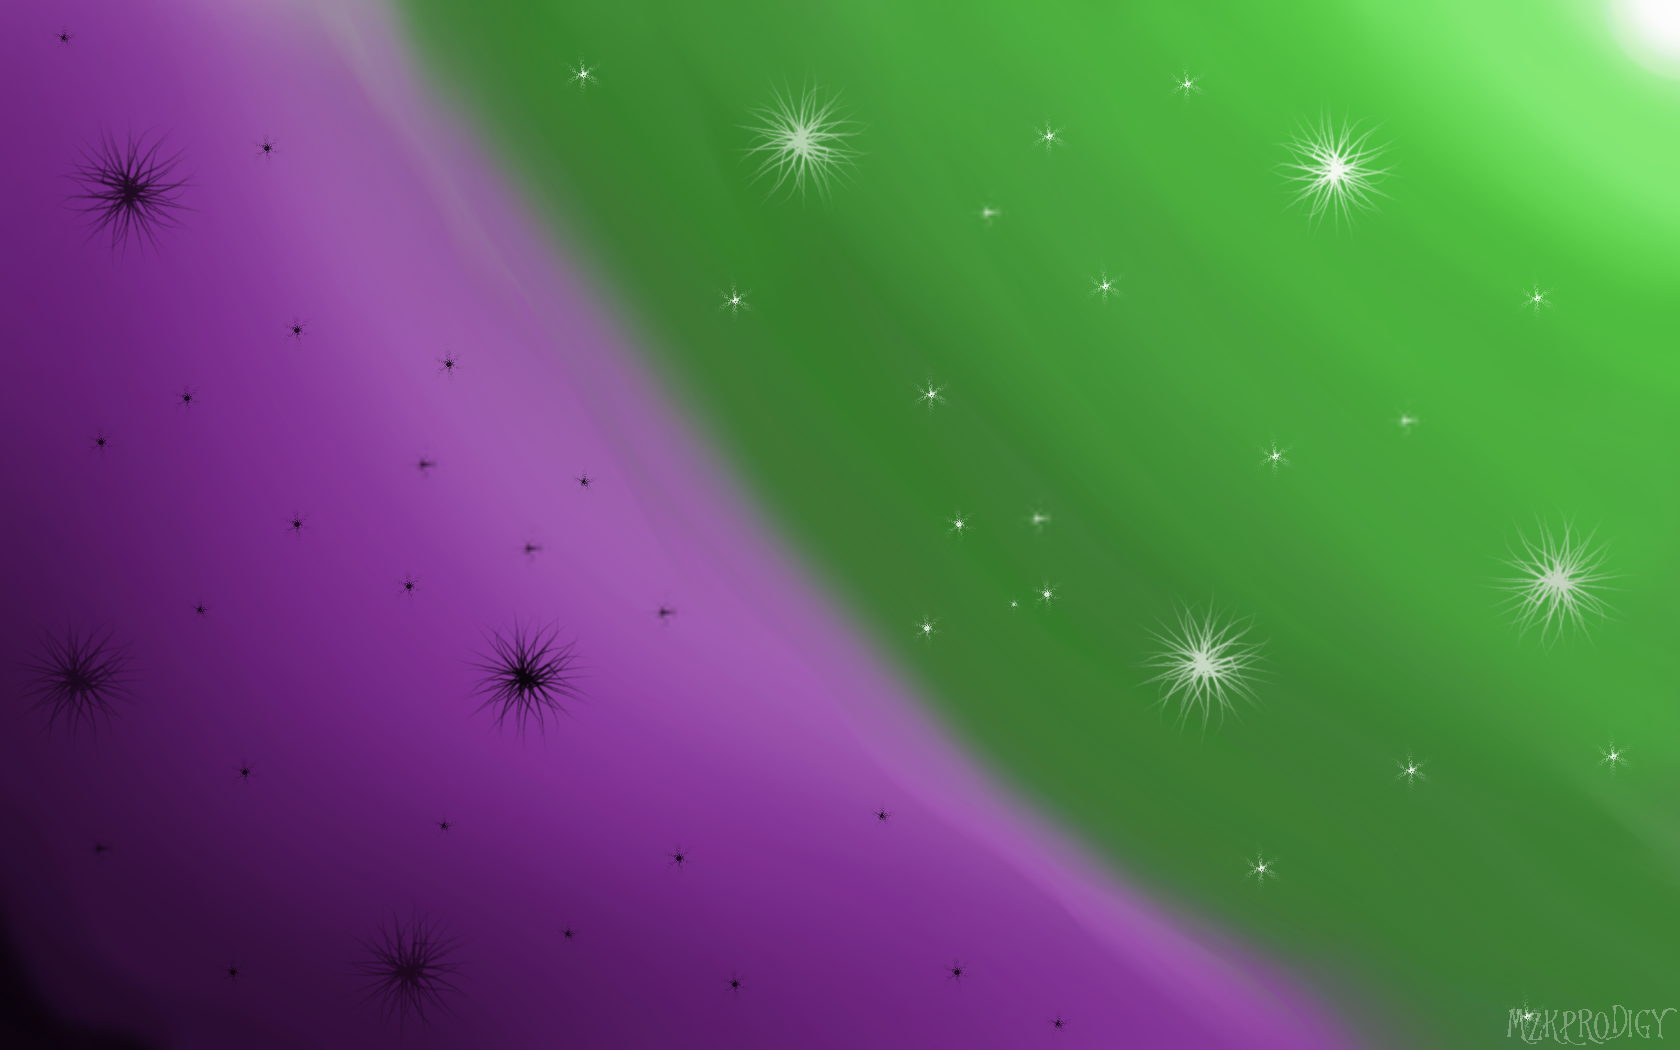 Simple Abstract Wallpaper Green And Purple Sky By Mzkprodigy On